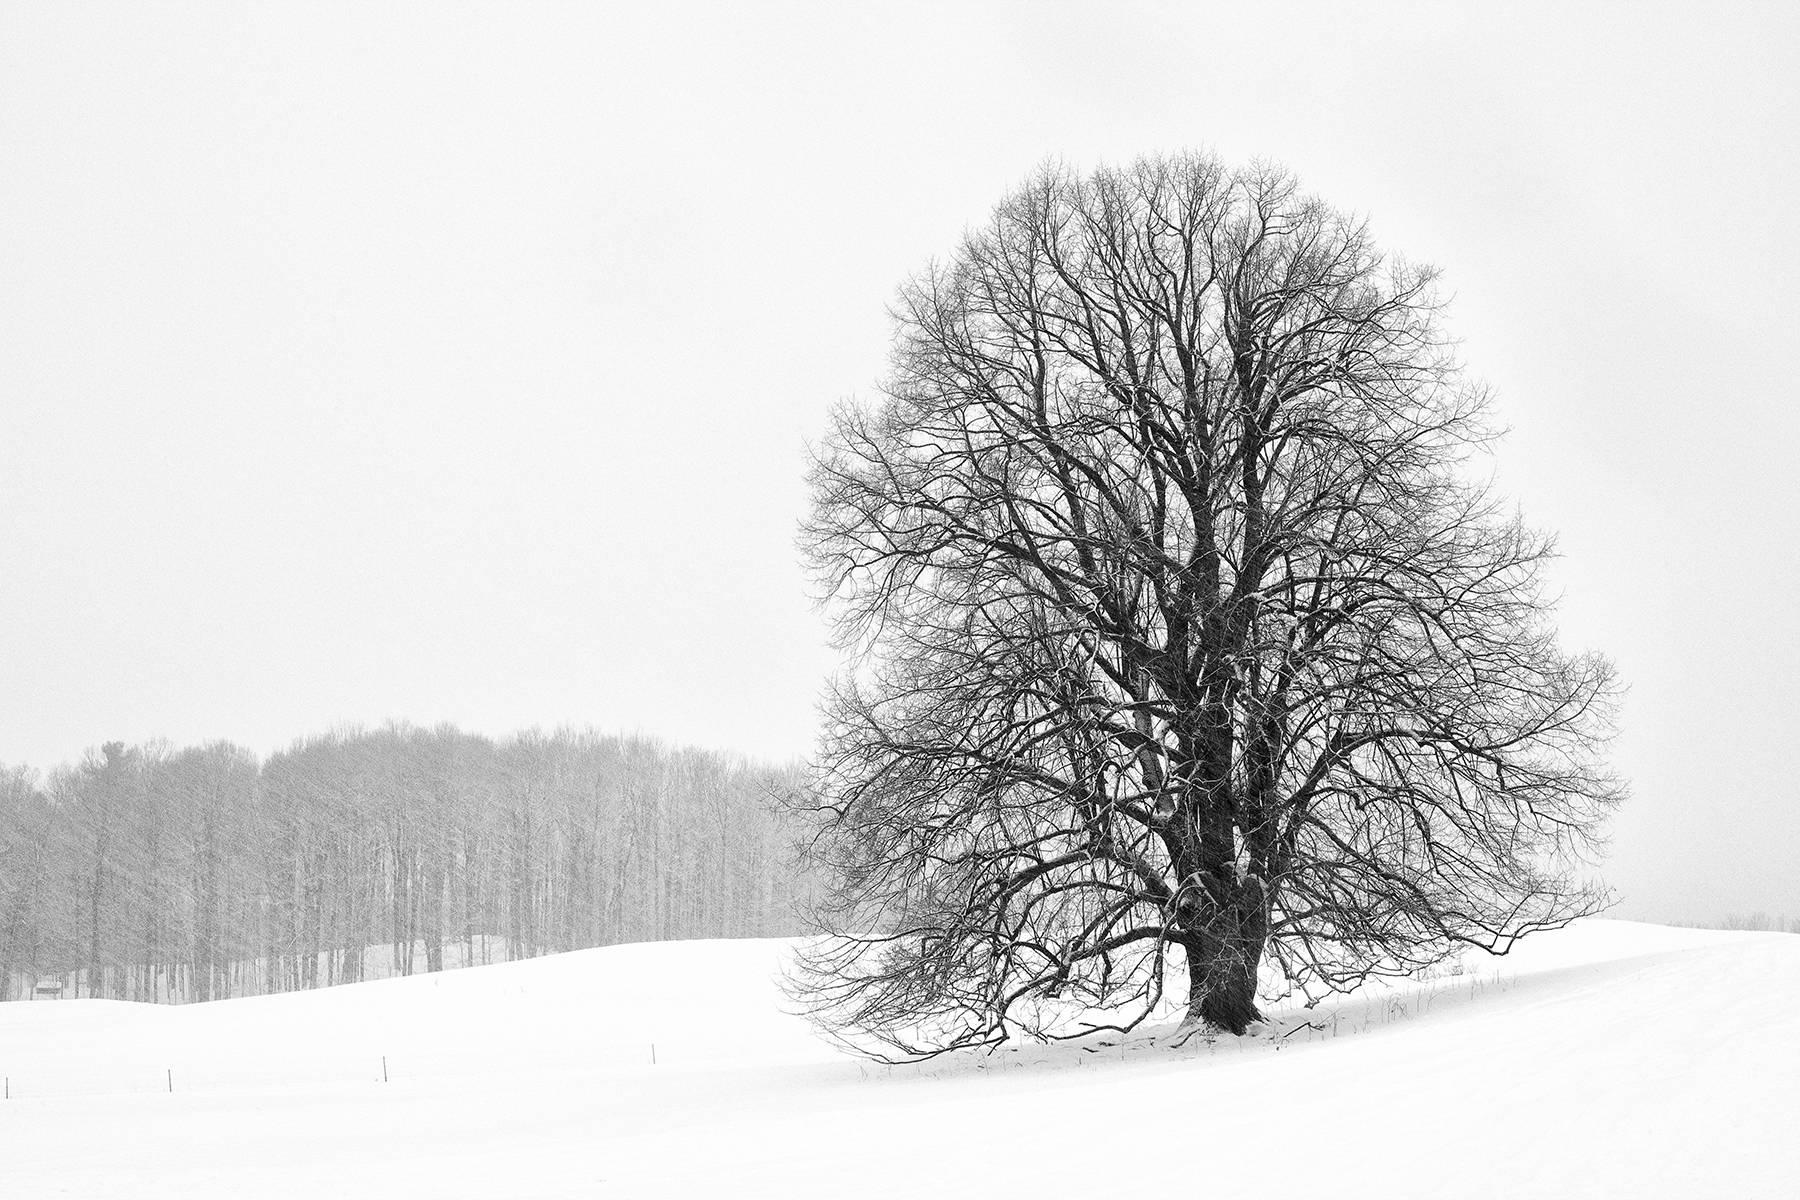 Rebecca Skinner’s “Lonely Tree” is part of her "Winter Trees" series documenting the beauty of New England in the winter. The 16 x 24 inch black and white photo with glossy finish is infused directly into metal making it waterproof and easy to